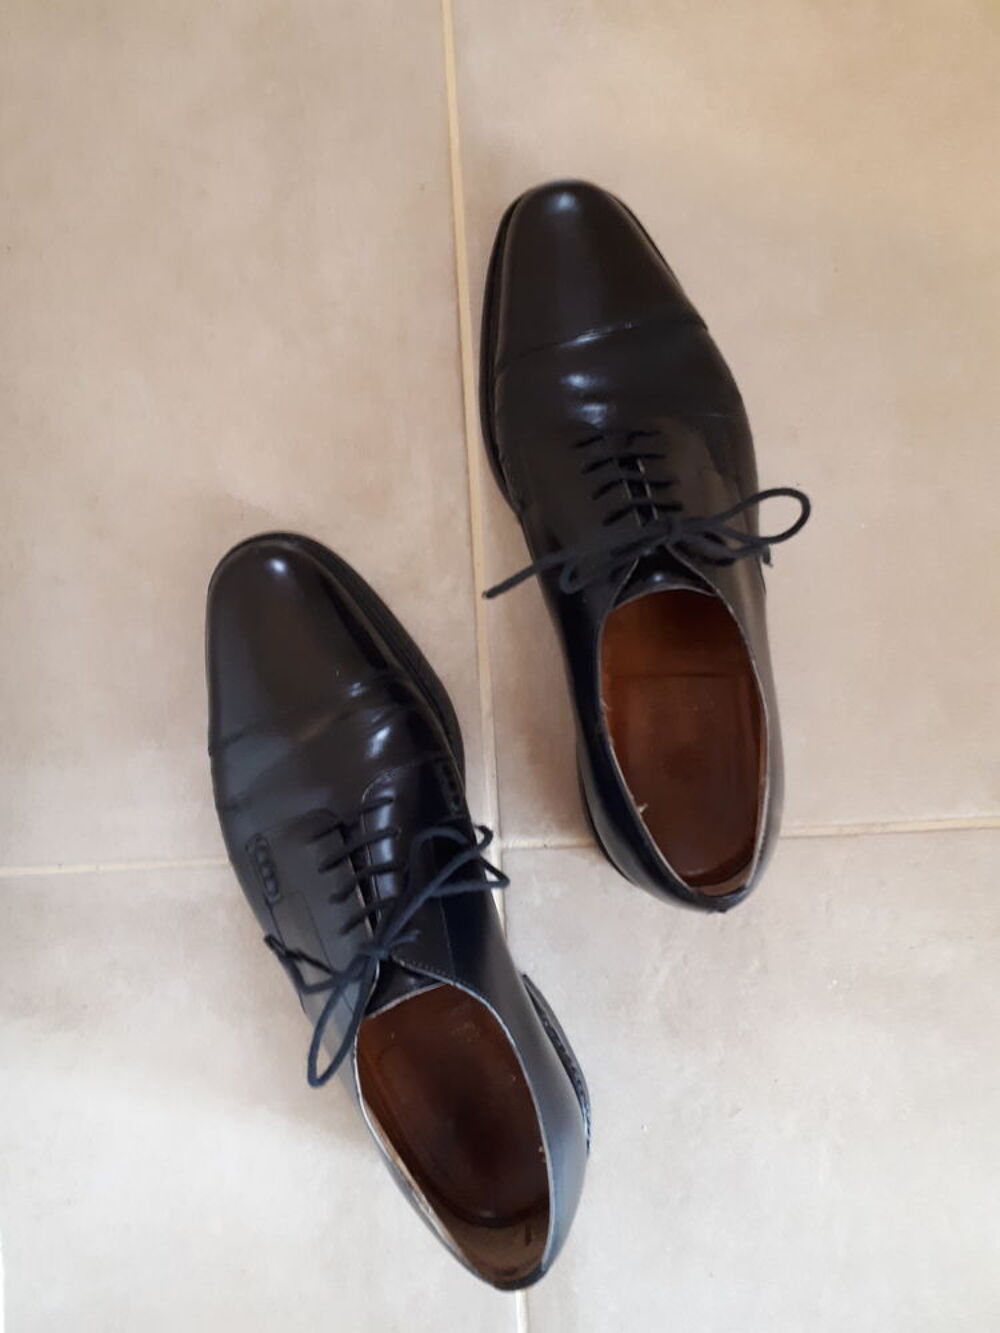 CHURCH'S English Shoes
Chaussures